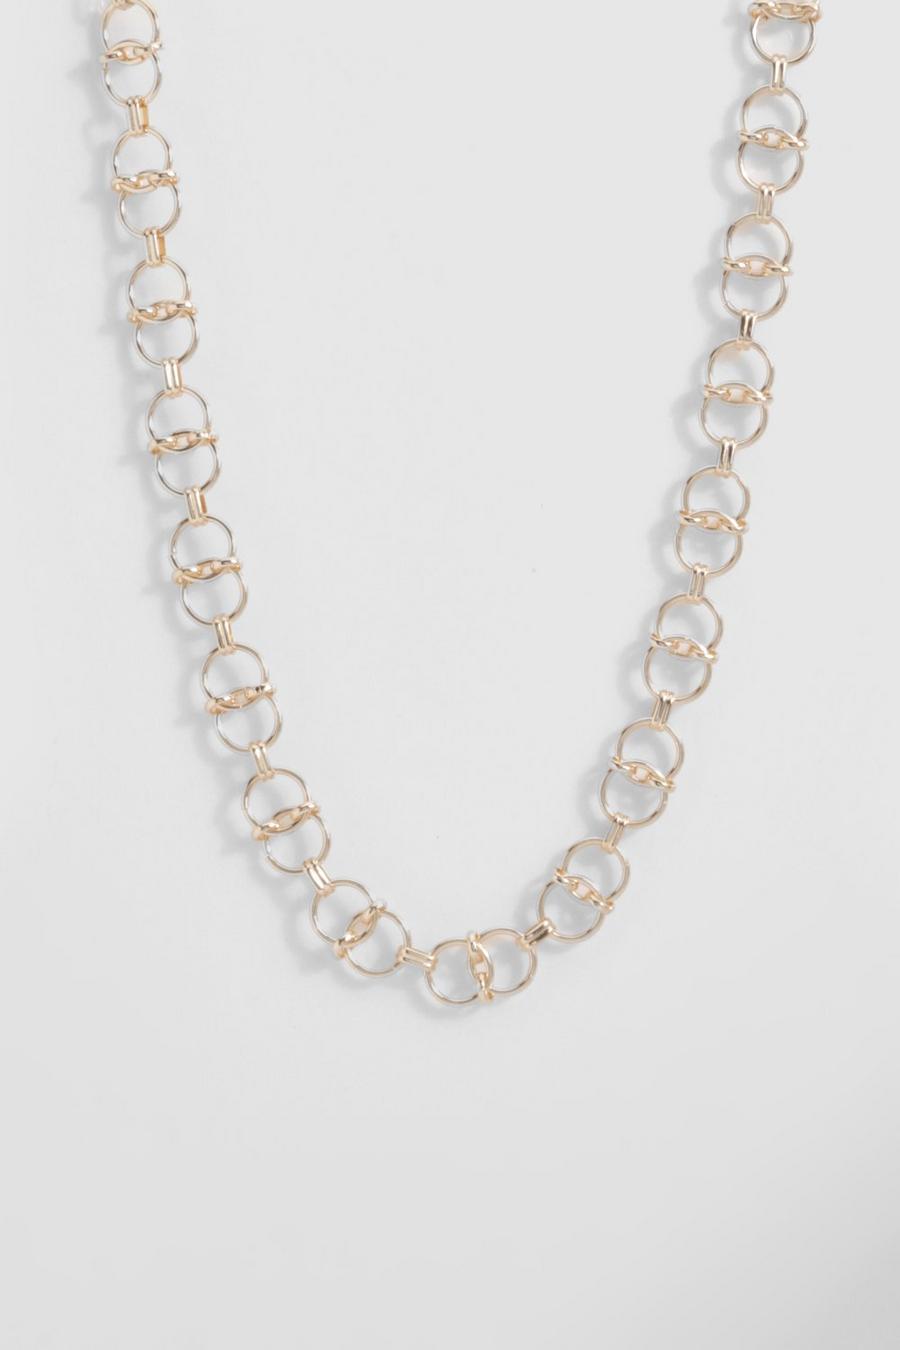 Gold Circle Link Chain